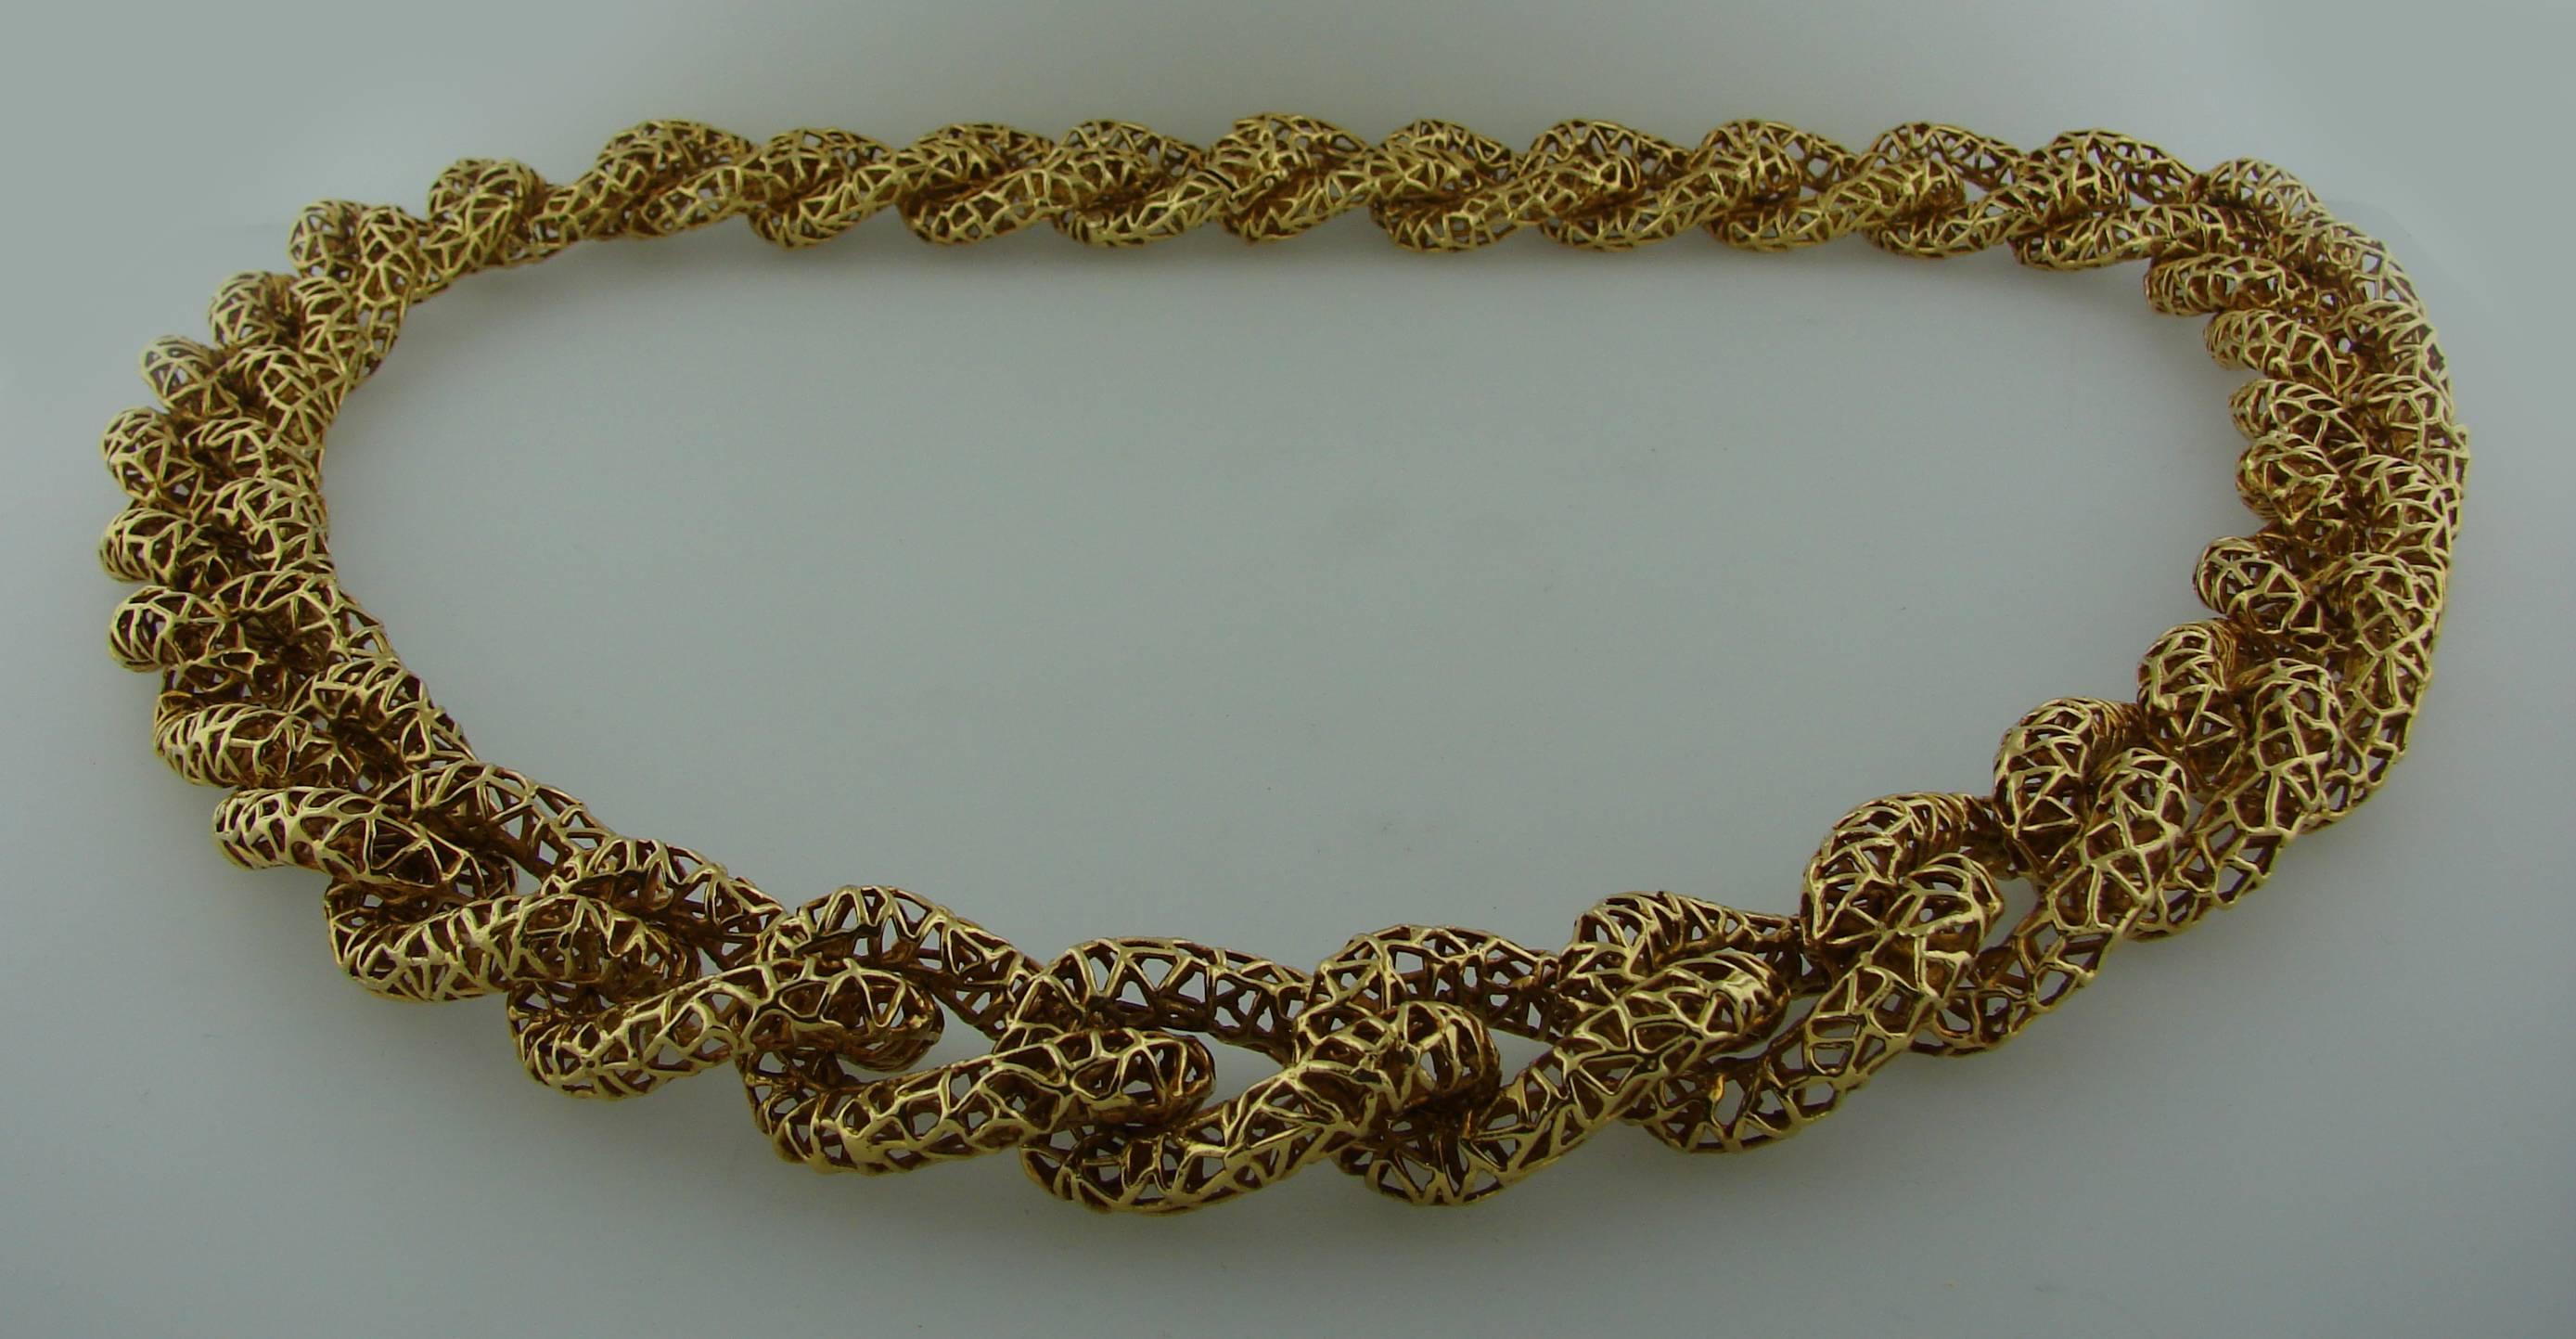 Women's or Men's 1980s Tiffany & Co. Gold Openwork Massive Chain Link Necklace